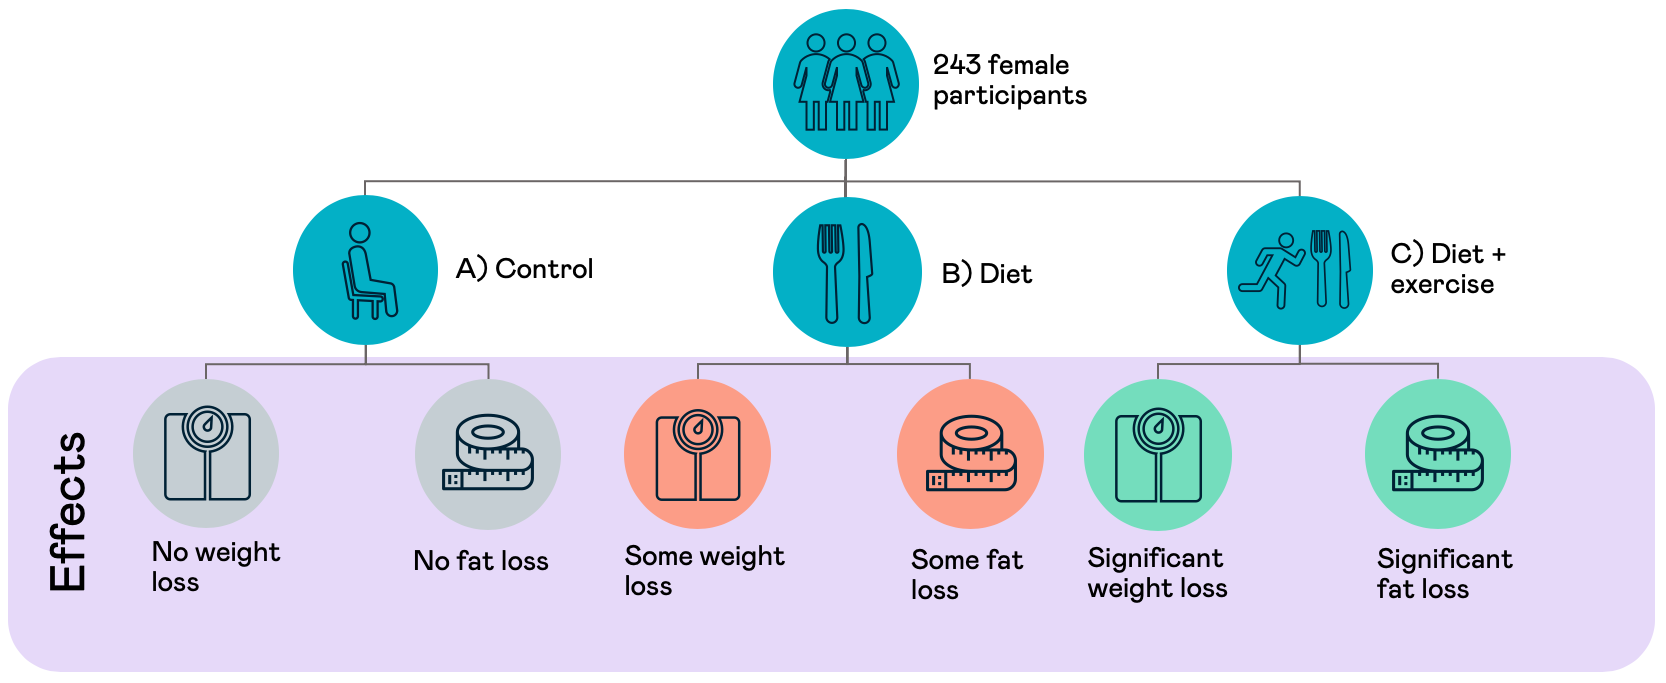 Diet and exercise trial with postmenopausal women